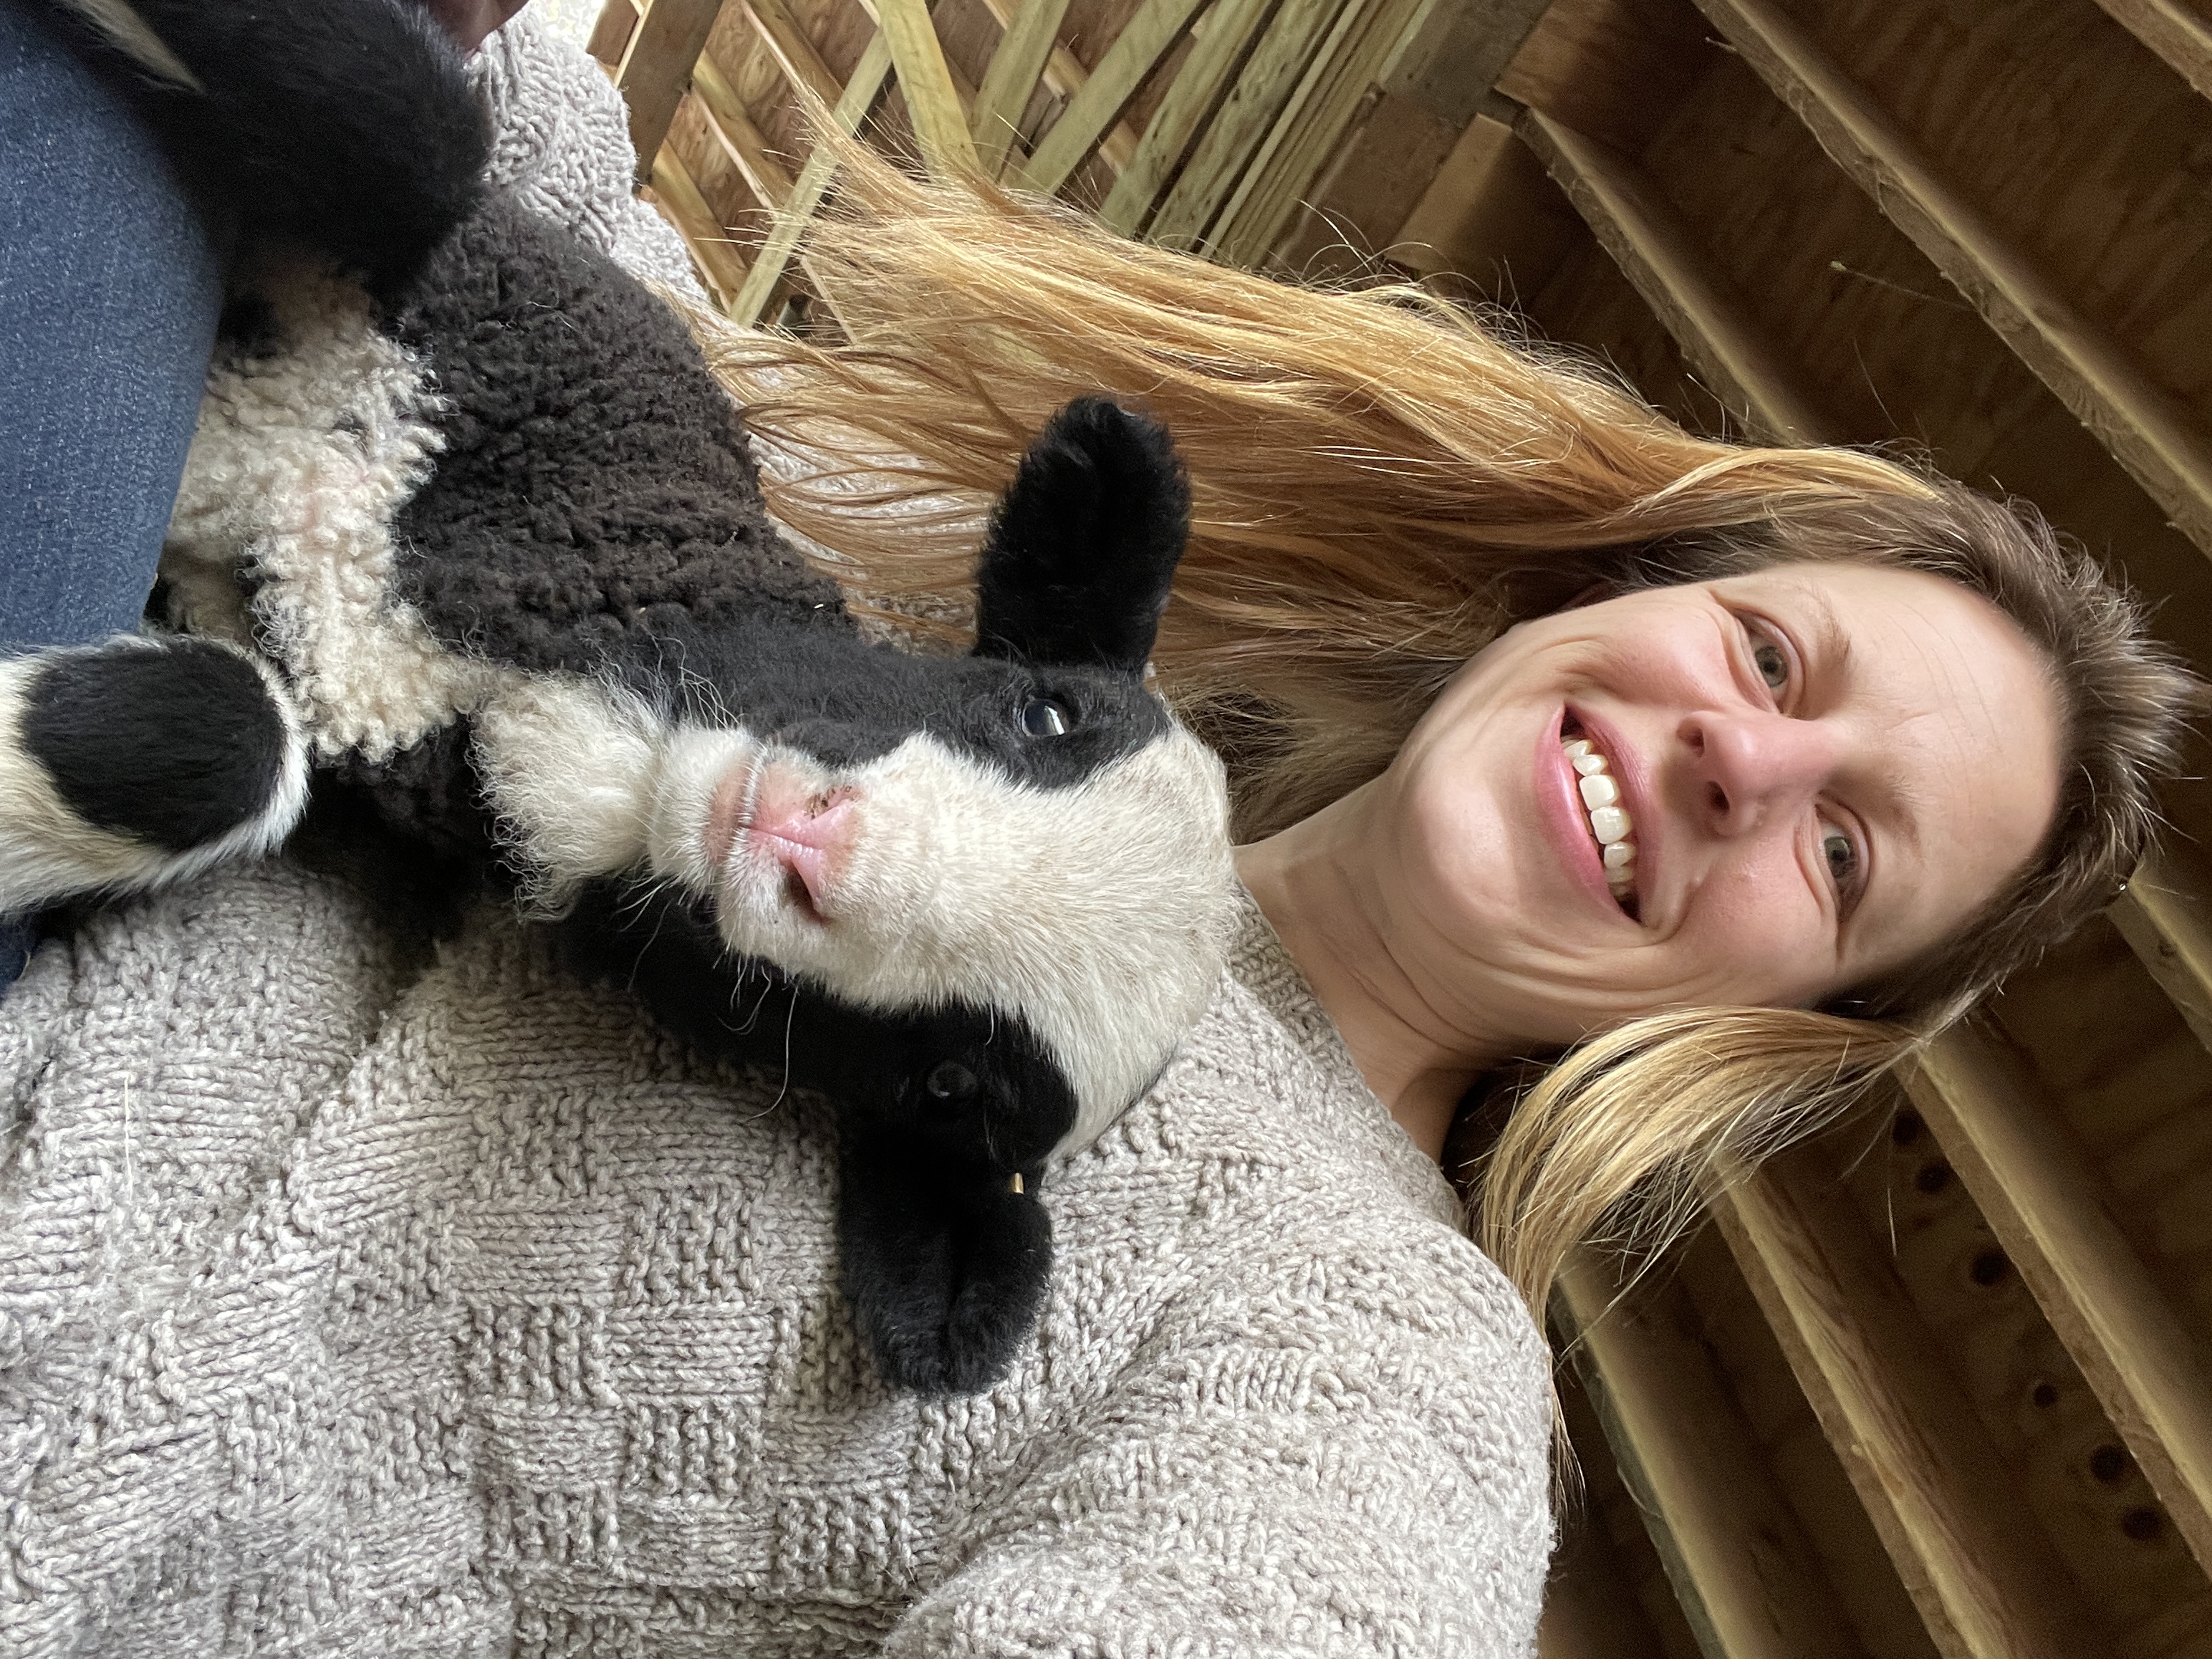 Woman with blond hair holds black-and-white lamb